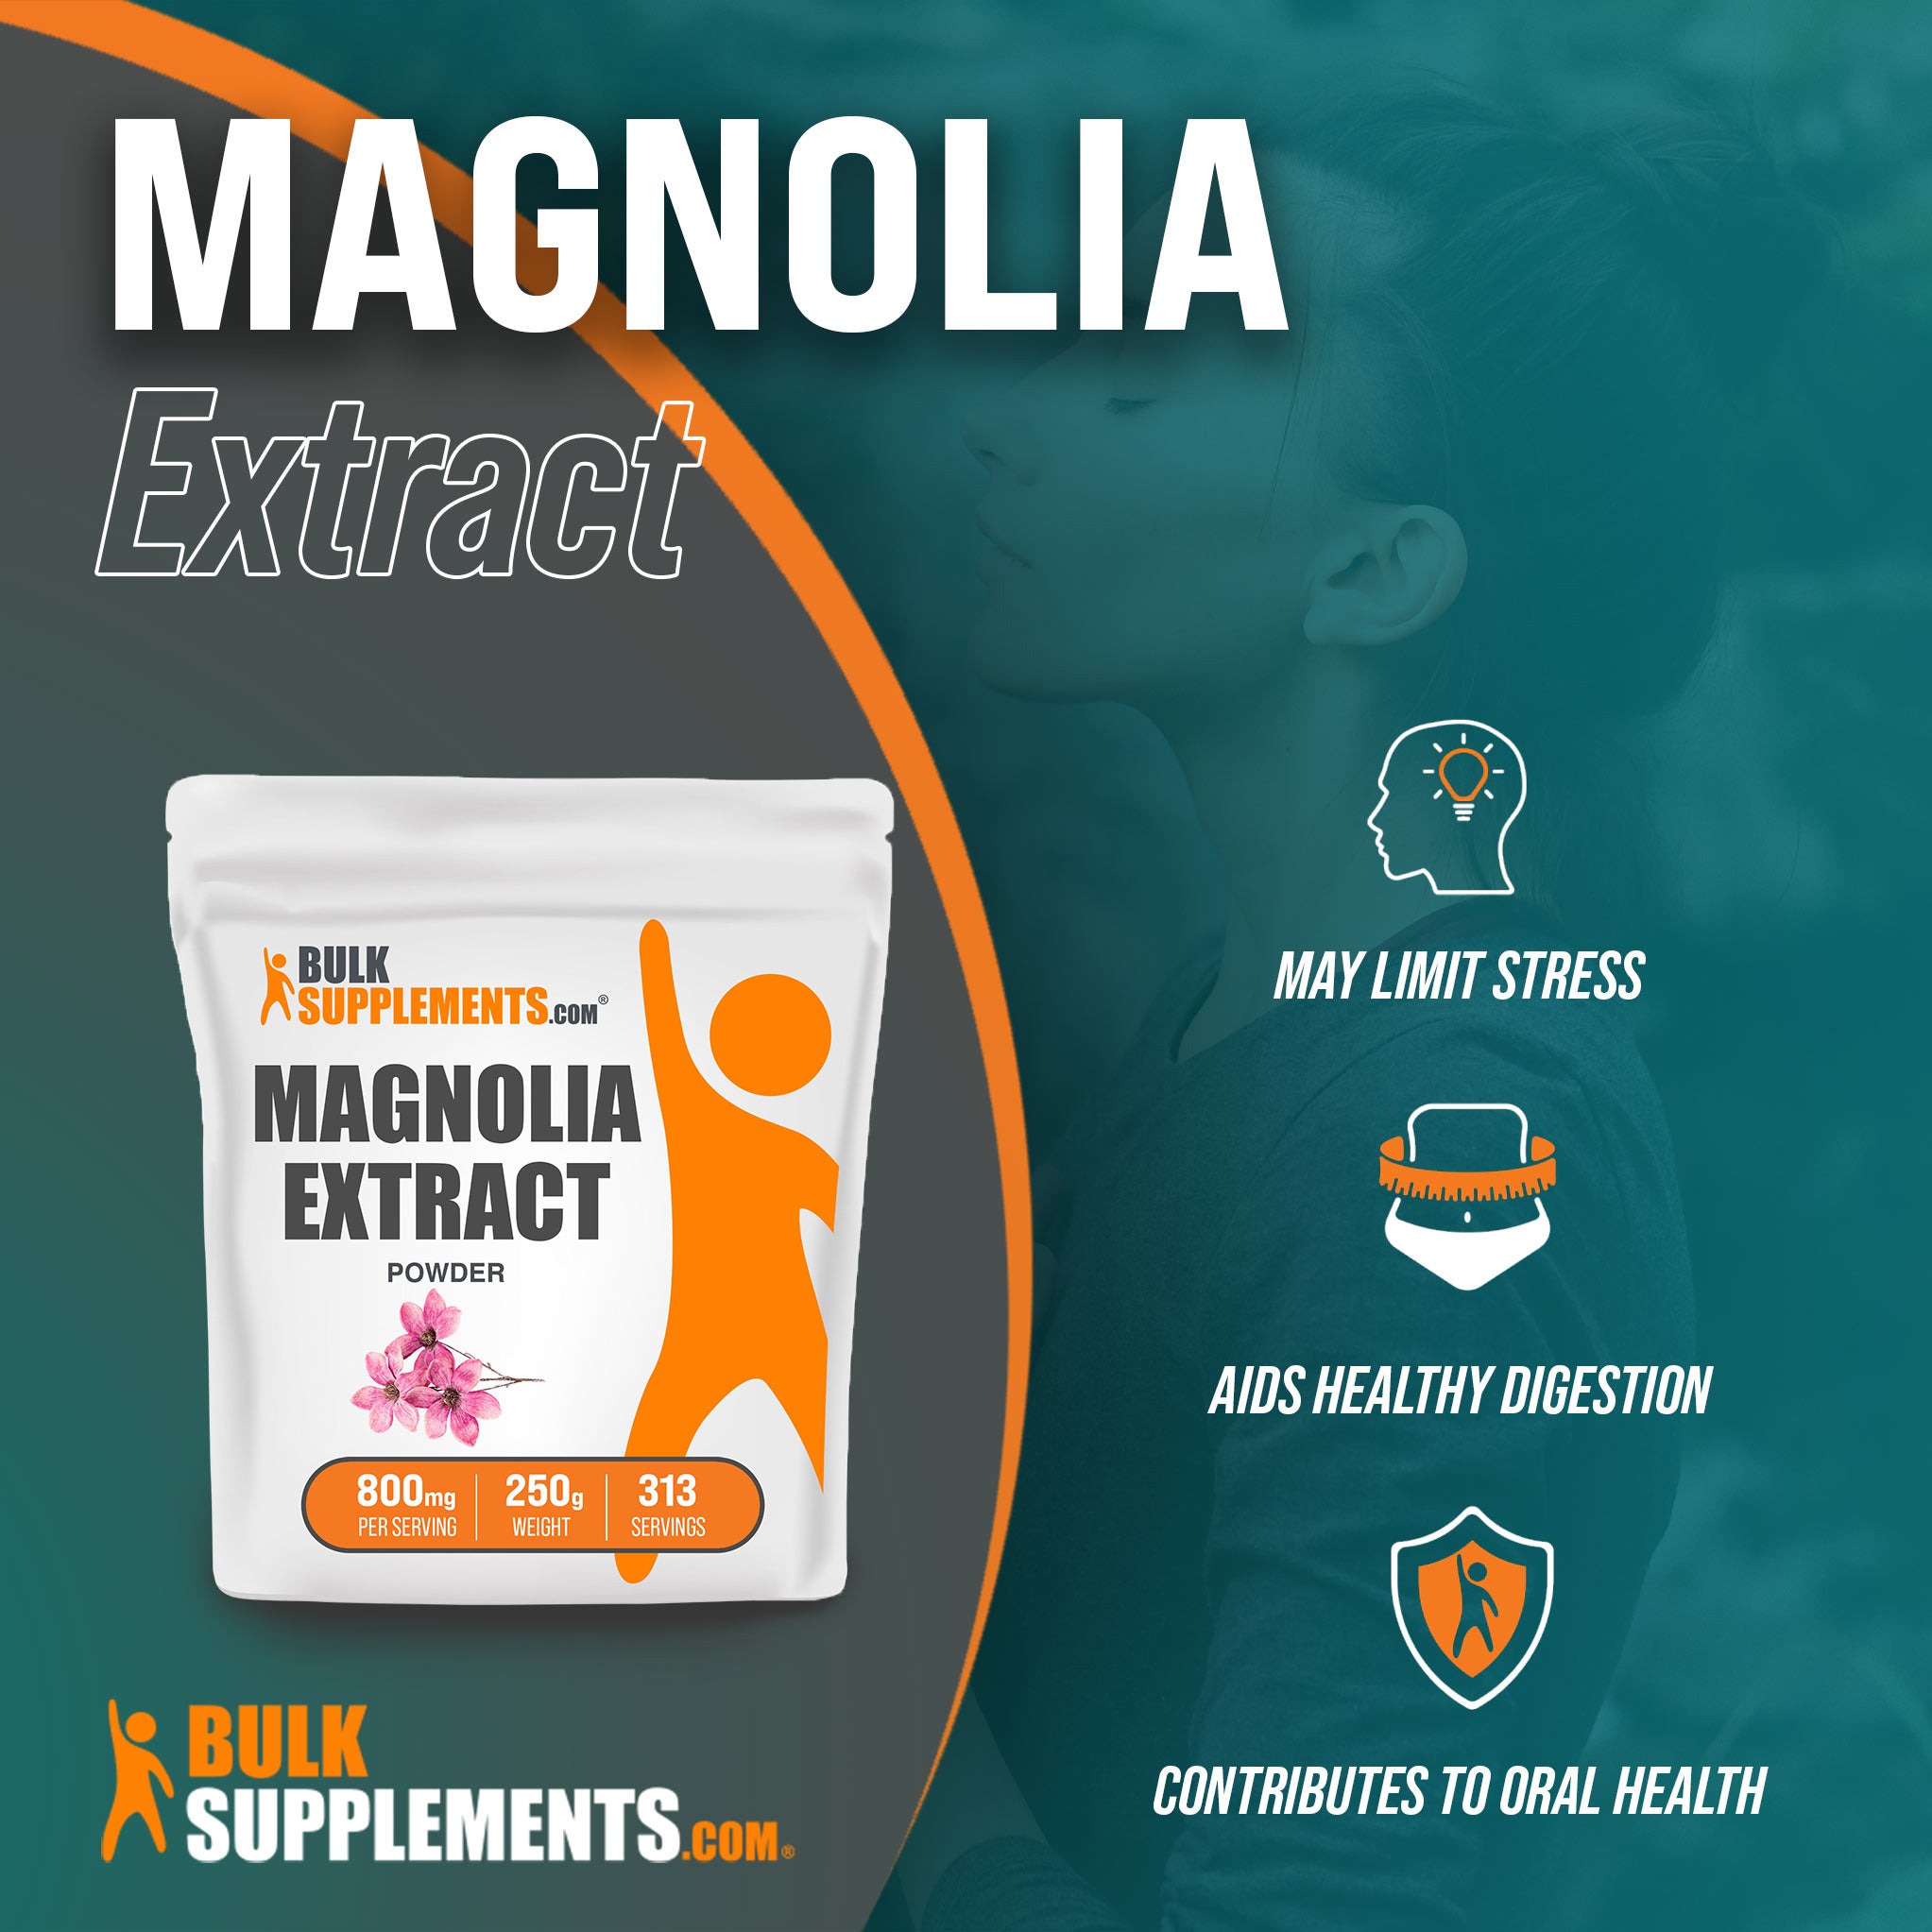 Benefits of Magnolia Extract: may limit stress, aids healthy digestion, contributes to oral health